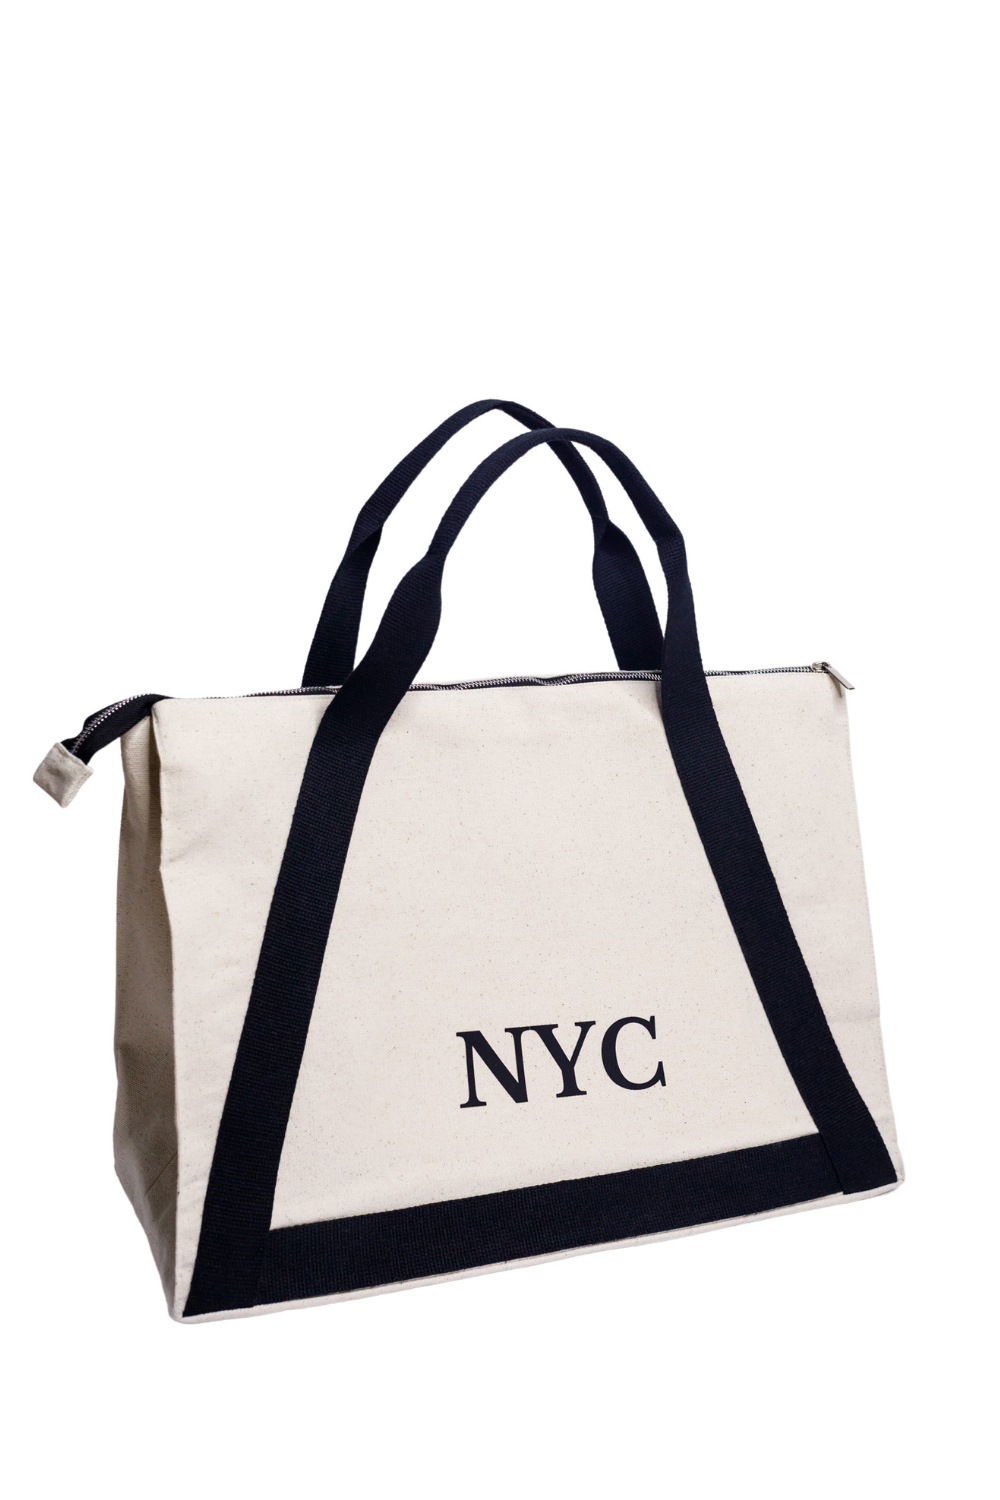 Eco-bag with a black handle White New York 08S01